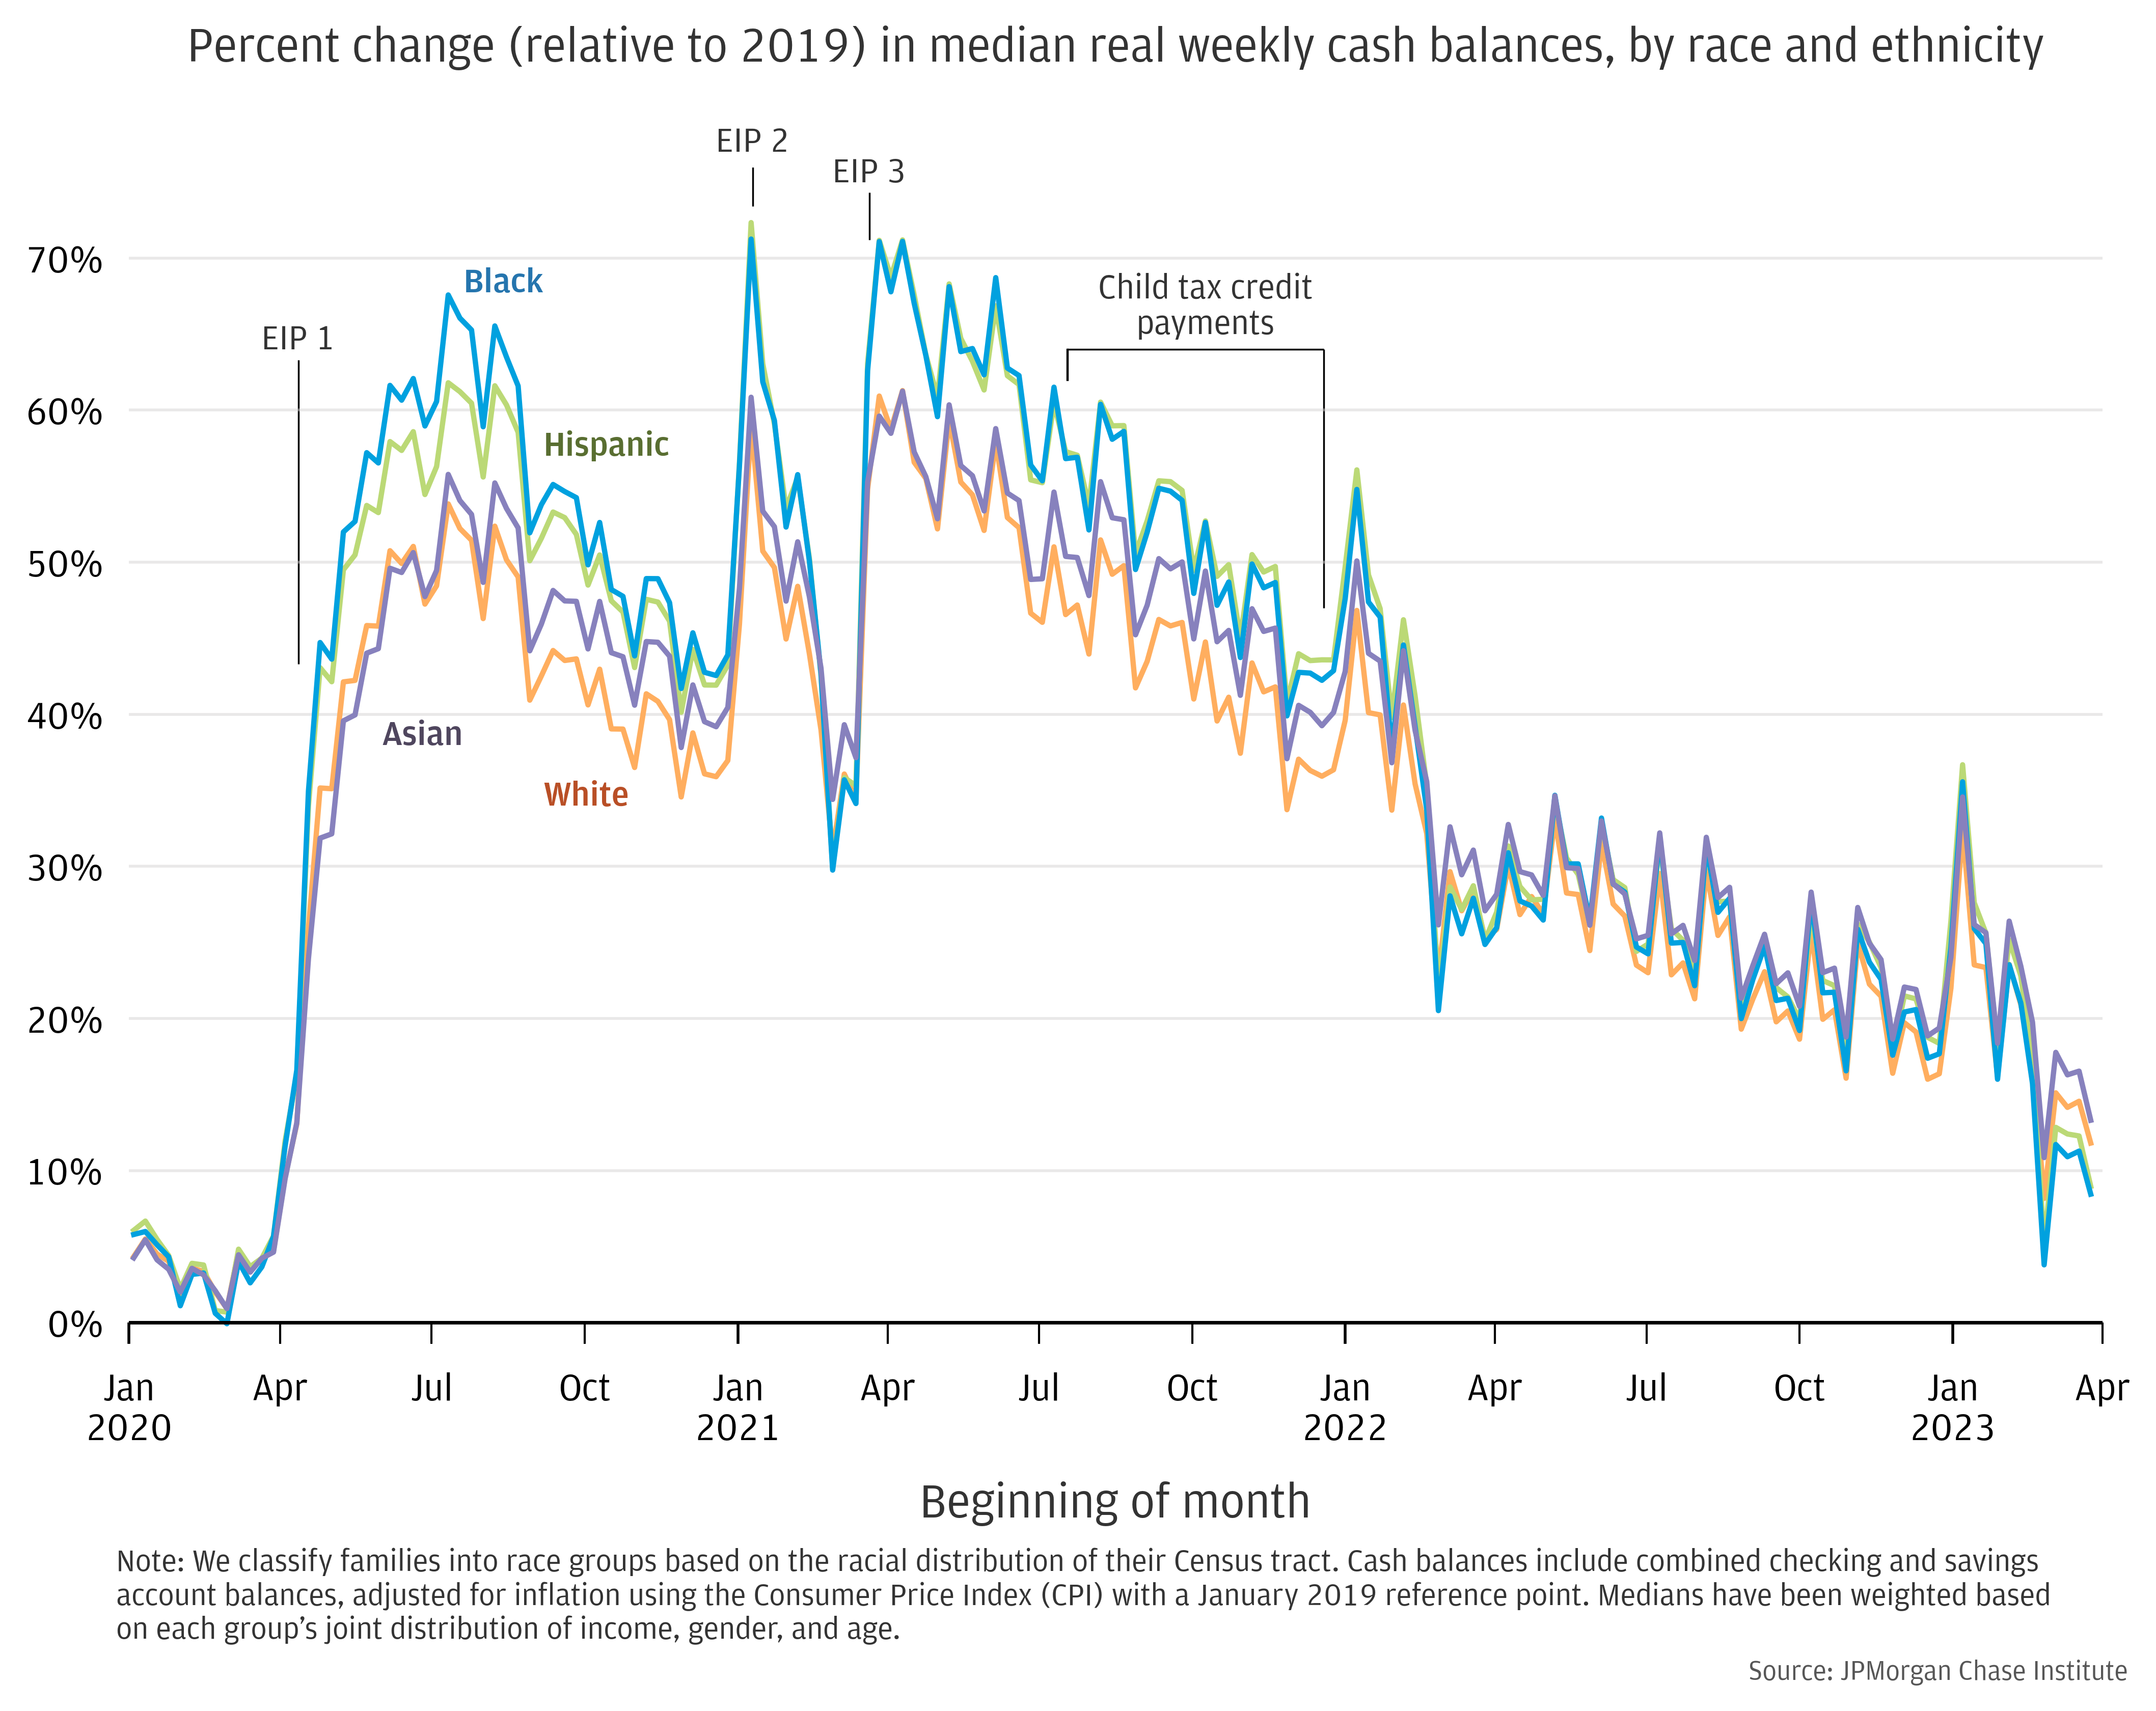 Percent change (relative to 2019) in median cash balances, by race and ethnicity